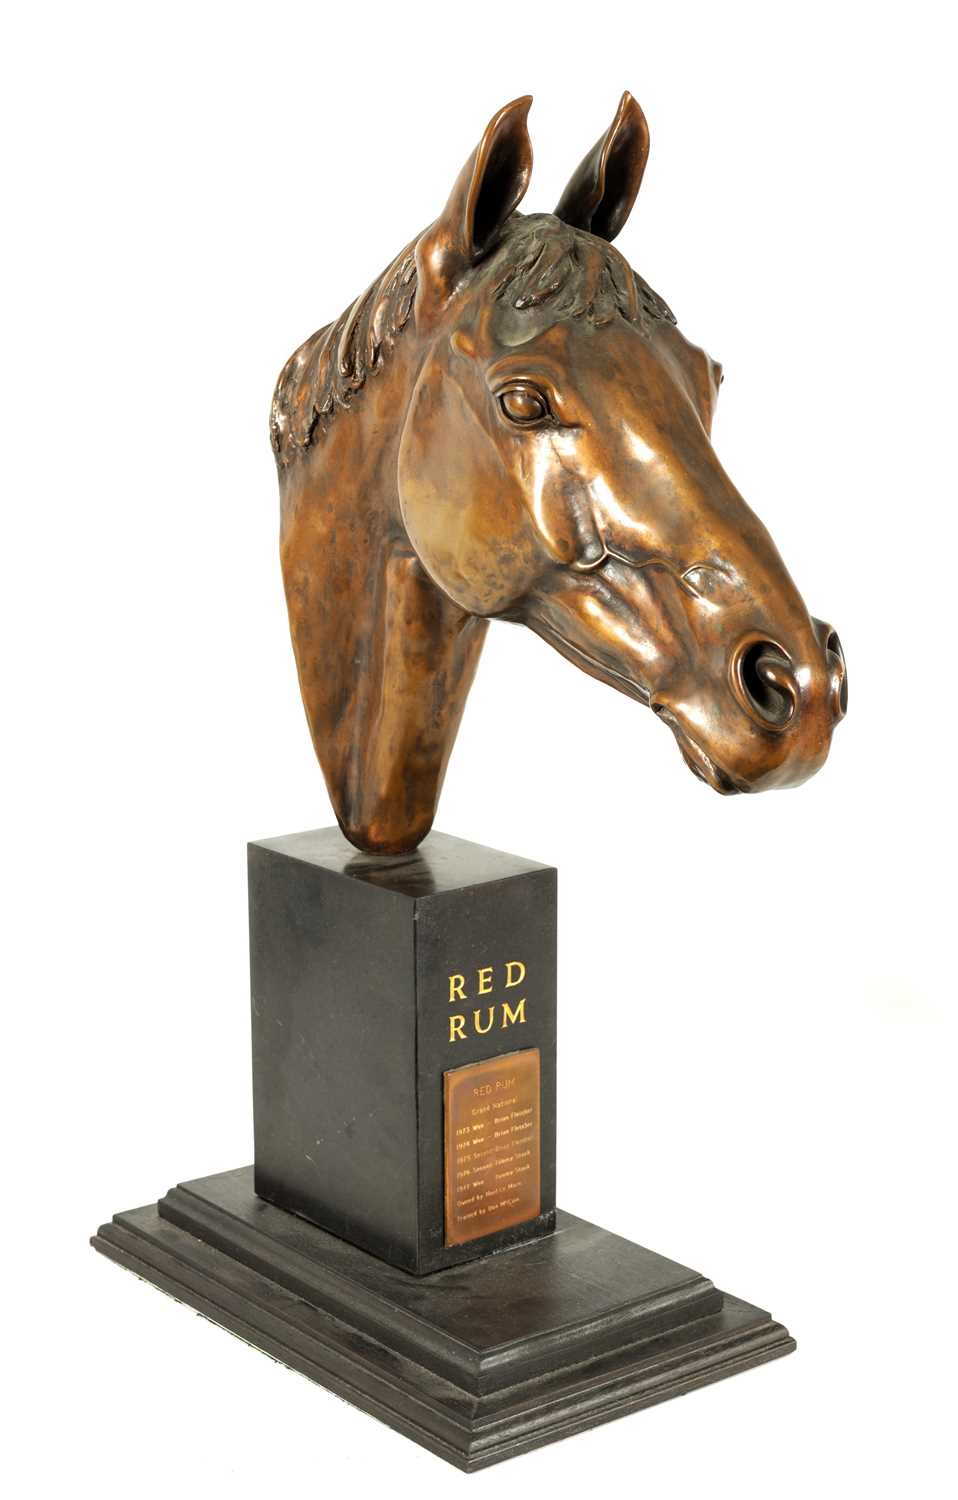 MAUREEN COATMAN. A LARGE LIMITED EDITION BRONZE SCULPTURE OF RED RUM